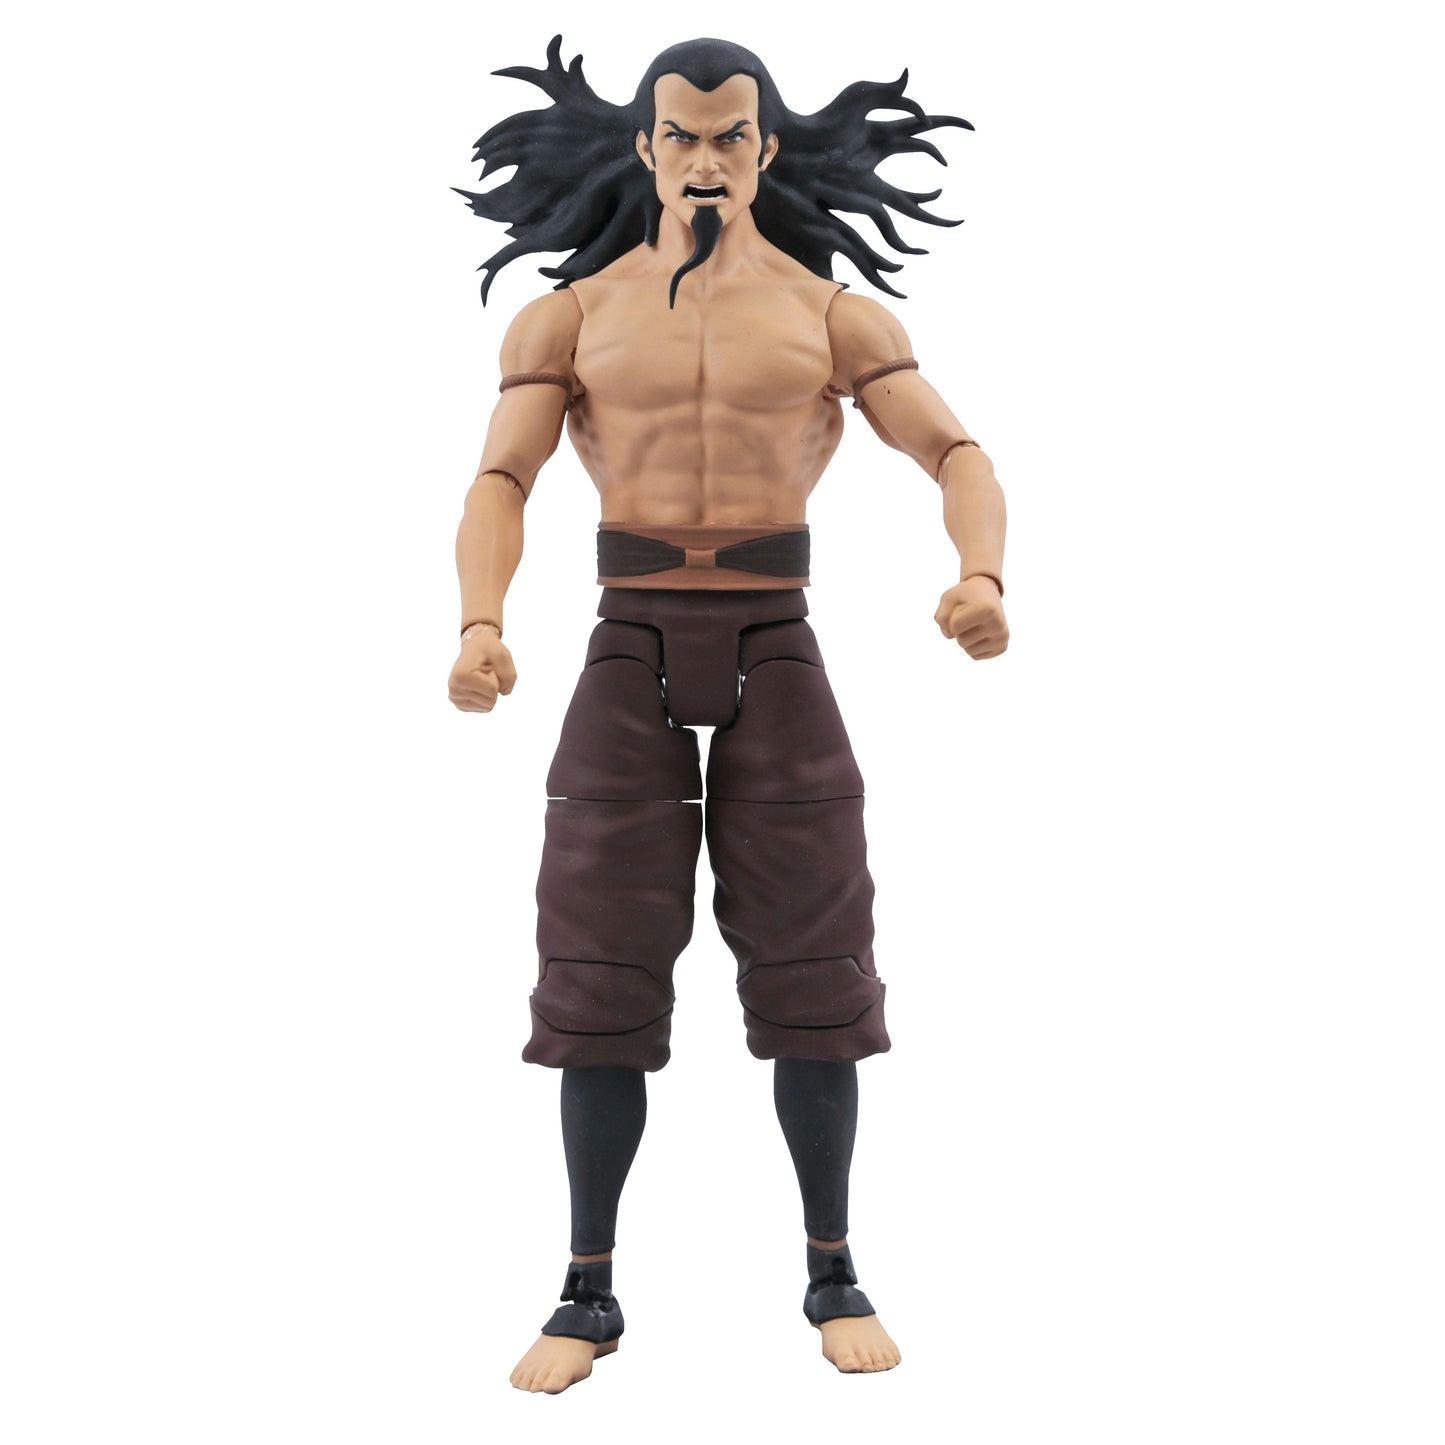 Avatar: The Last Airbender Action Figure: Series 3 - Lord Ozai